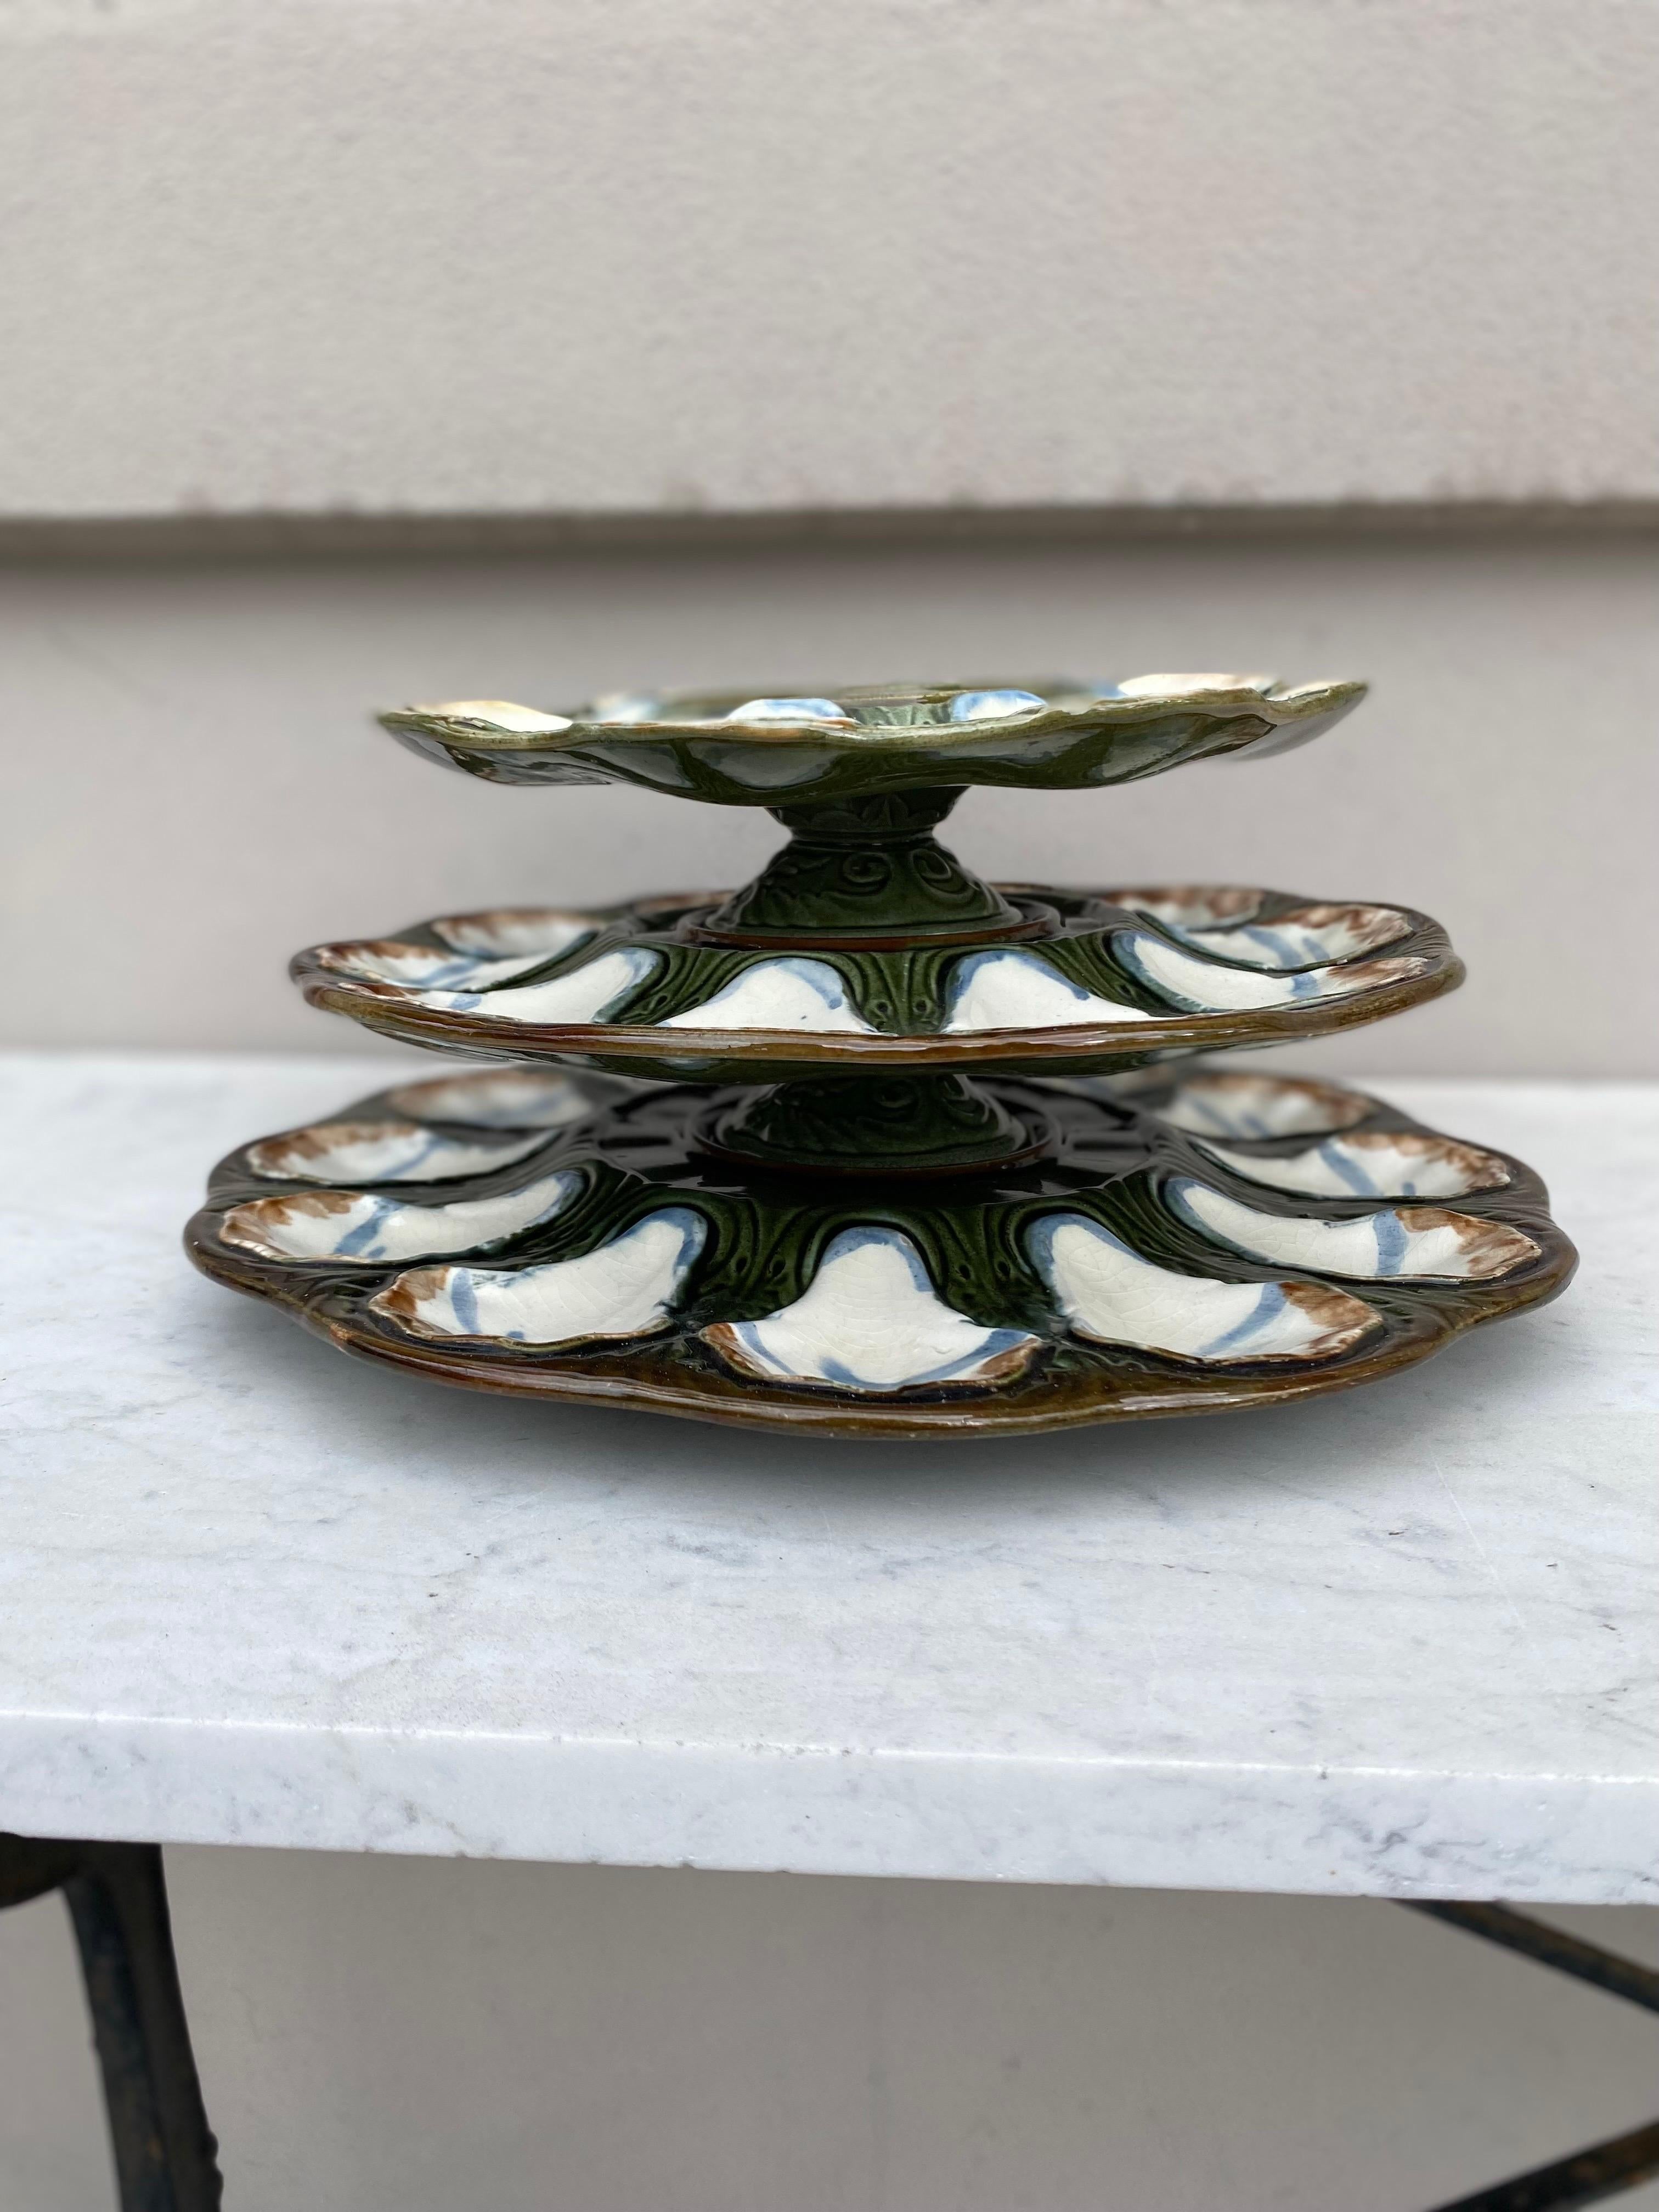 19th century rare French Majolica Oyster Server signed Longchamp.
Measures: 3 platters / 14 inches diameter, 1.3 inches height.
11.5 inches diameter 2.5 inches height.
9.5 inches diameter, 2.5 inches height.